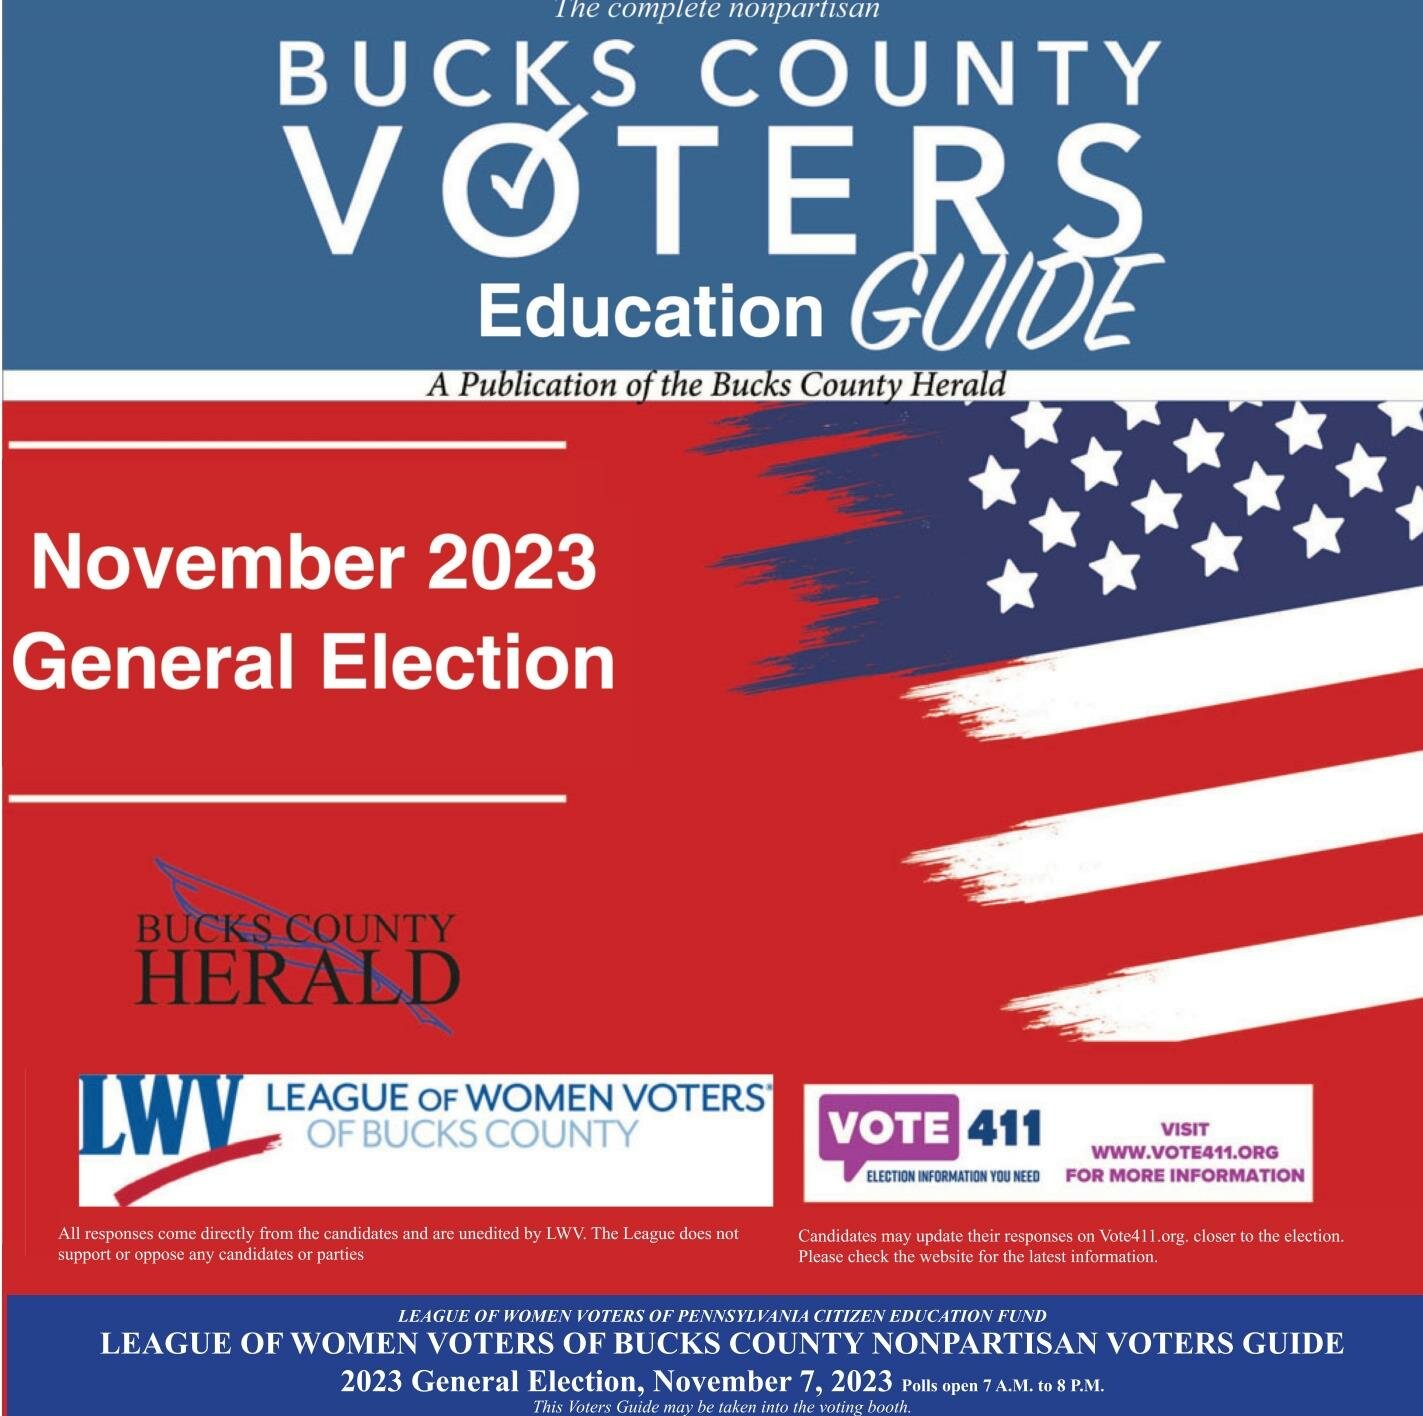 Bucks County Voters Education Guide: November 2023 General Election